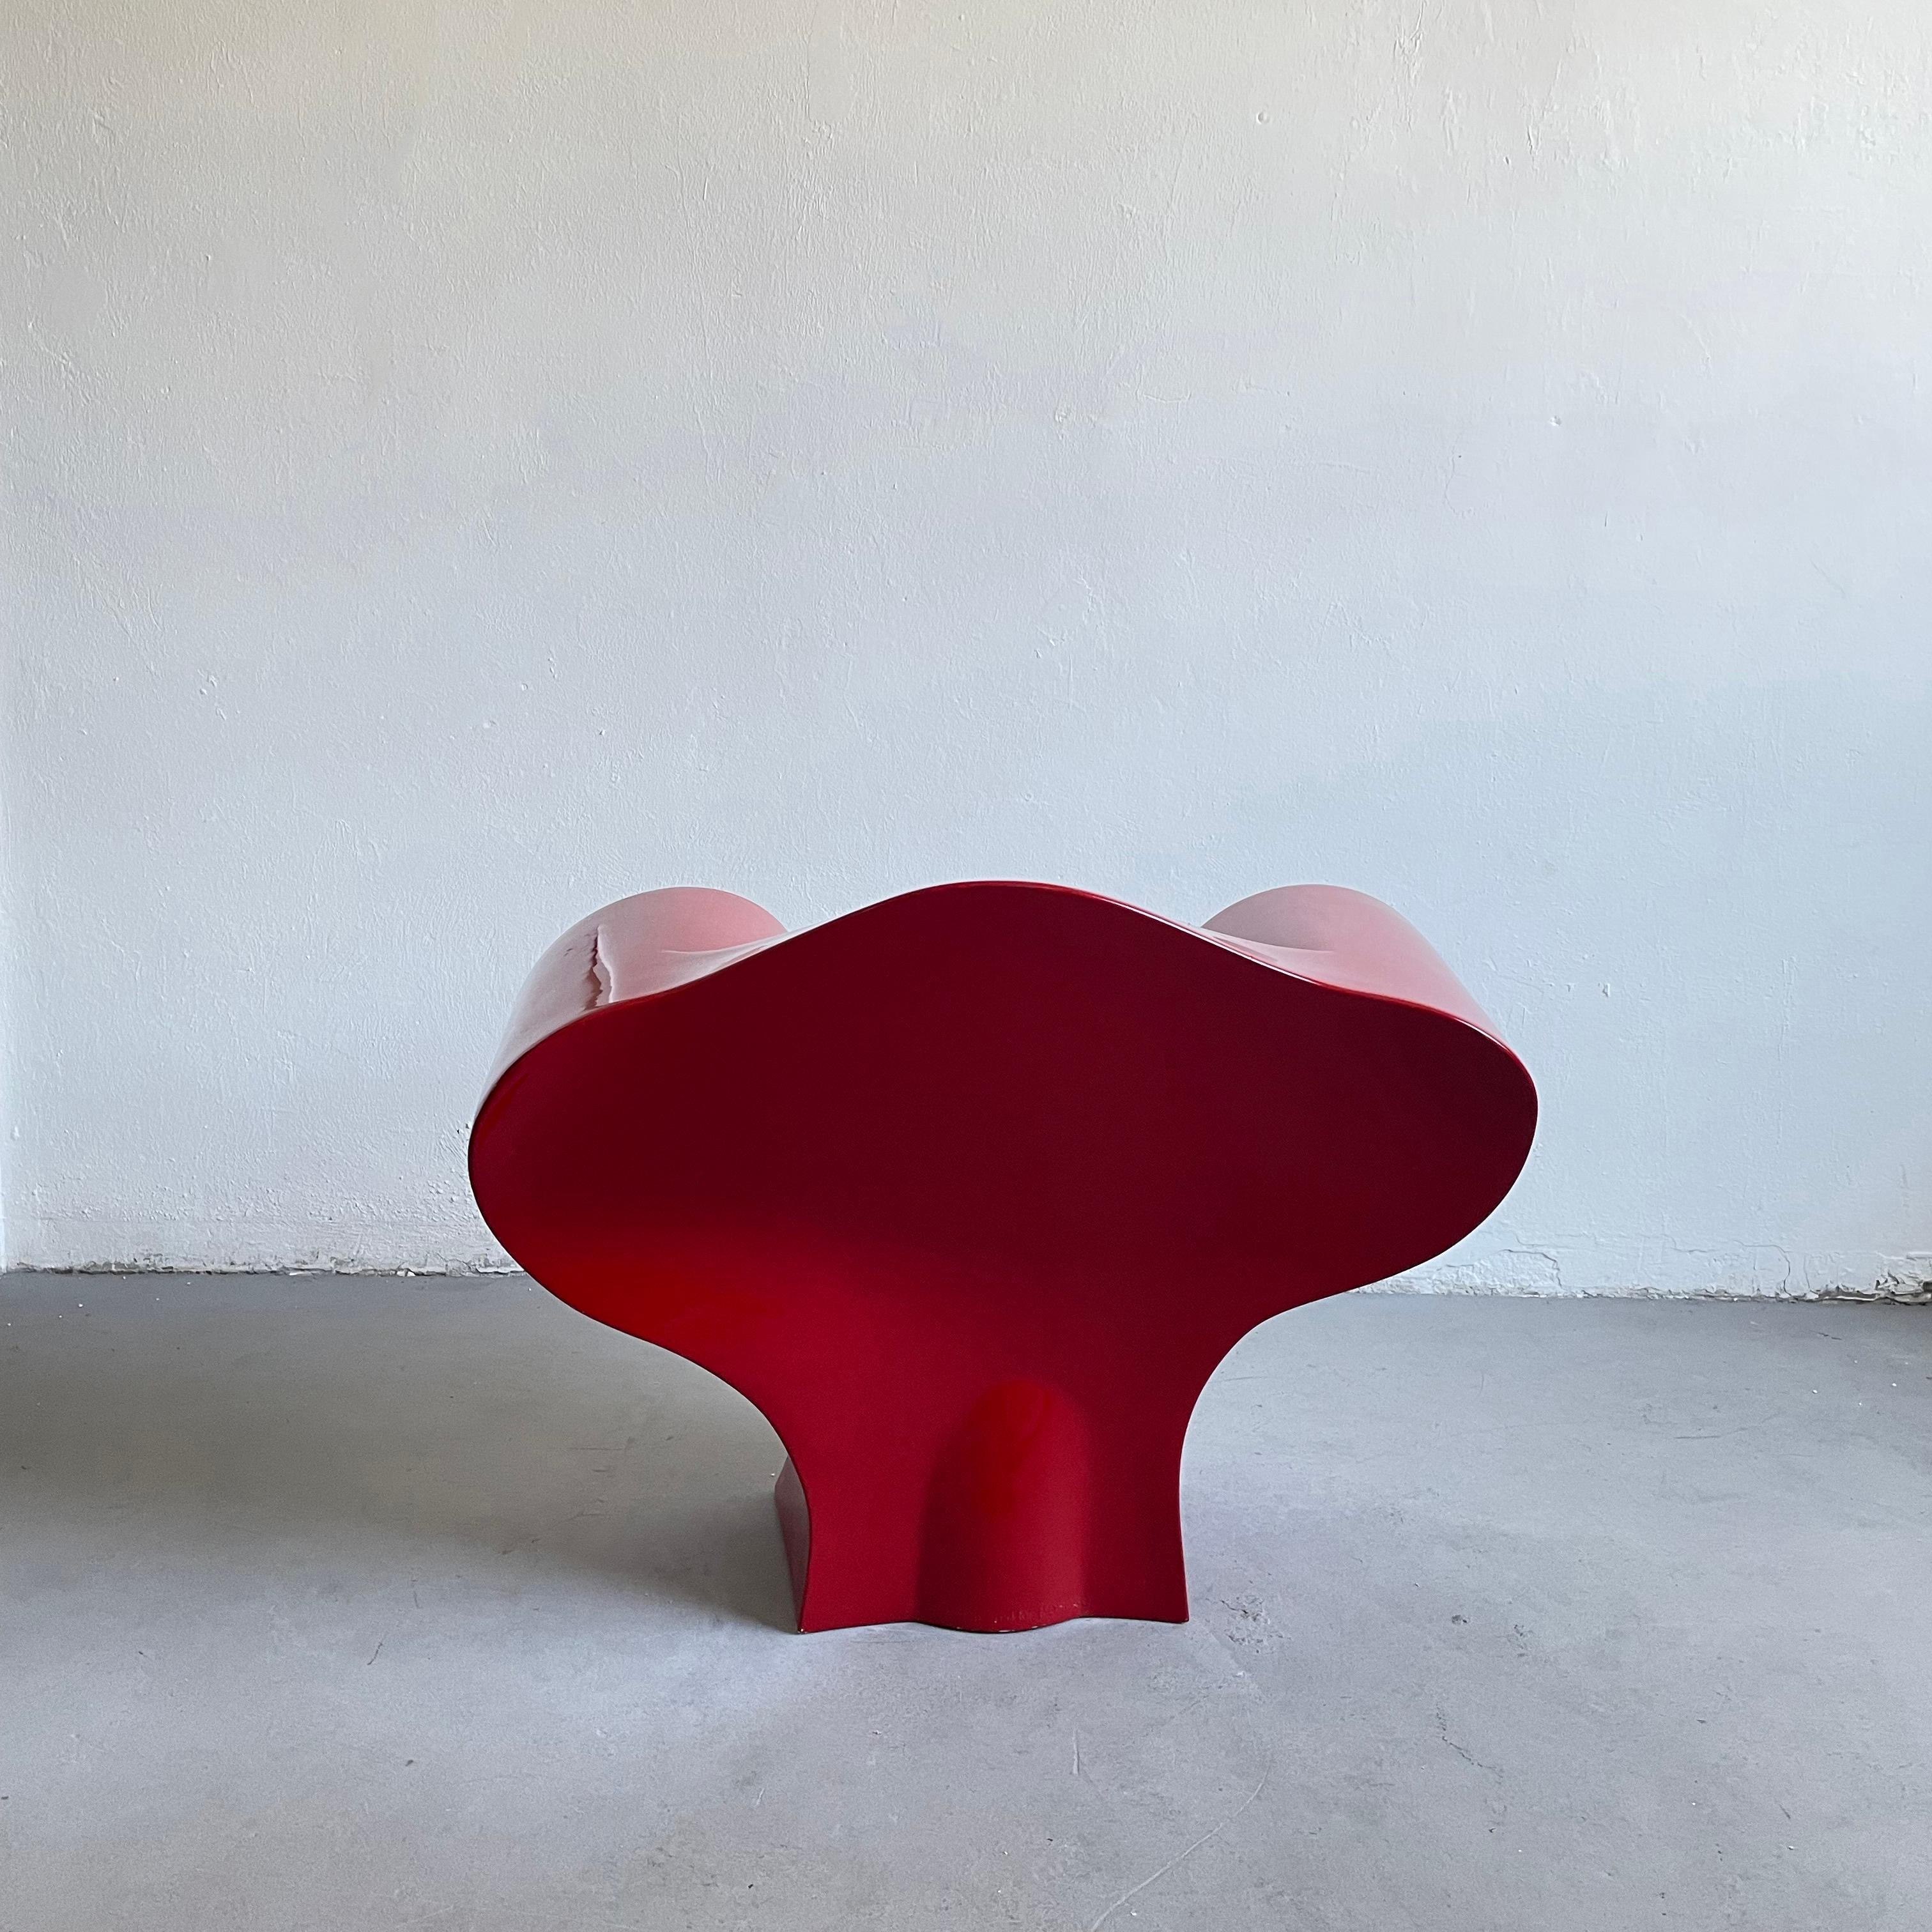 Late 20th Century Big-E Armchair Designed in 1991 by Ron Arad for Moroso, Italy For Sale